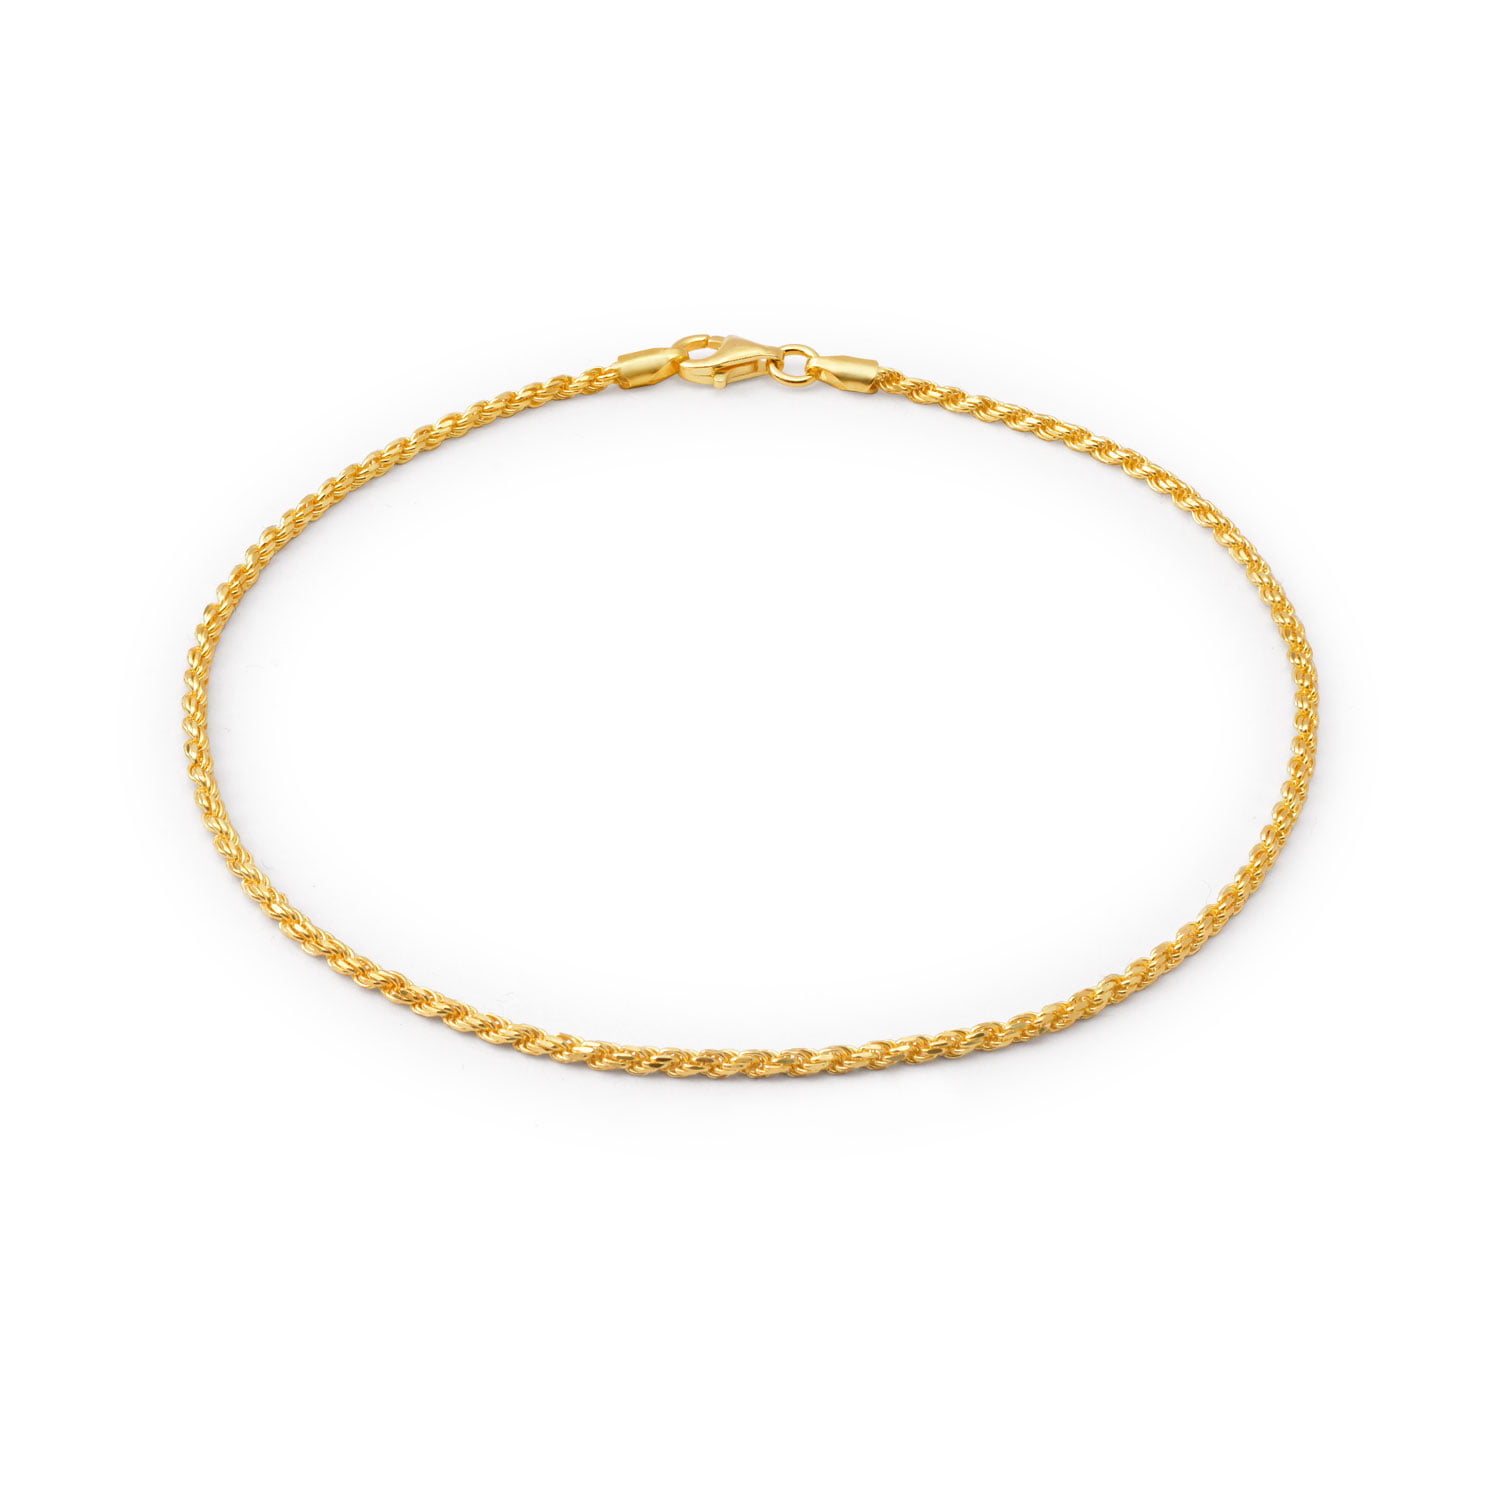 LIFETIME JEWELRY Colorful Anklet for Women Teen and Girls 24k Gold Plated B